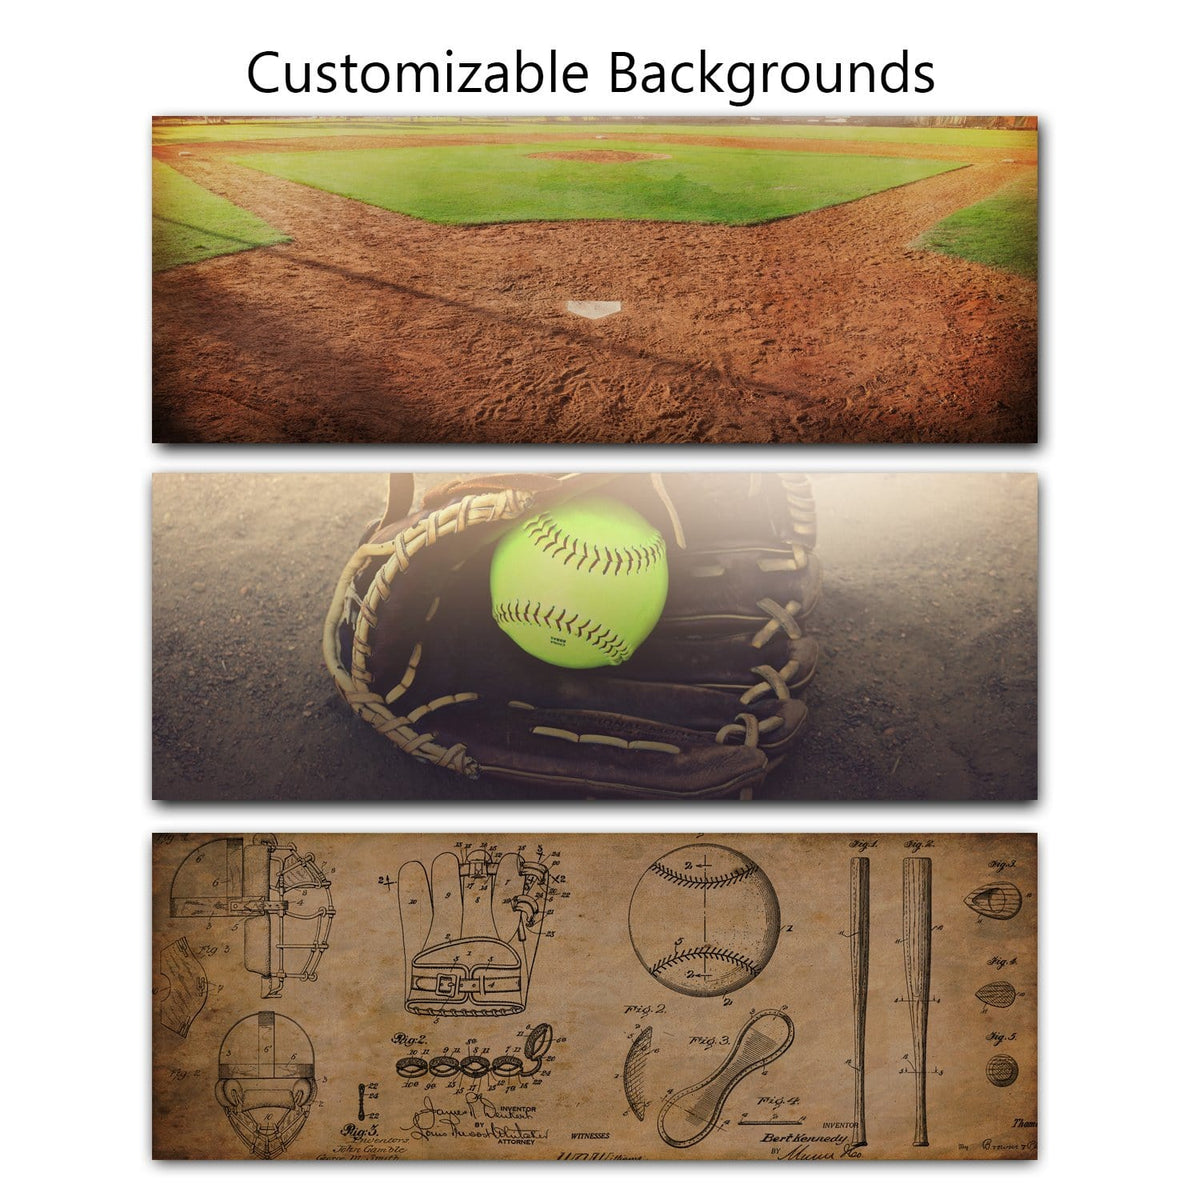 Try out different softball backgrounds when creating your personalized gift